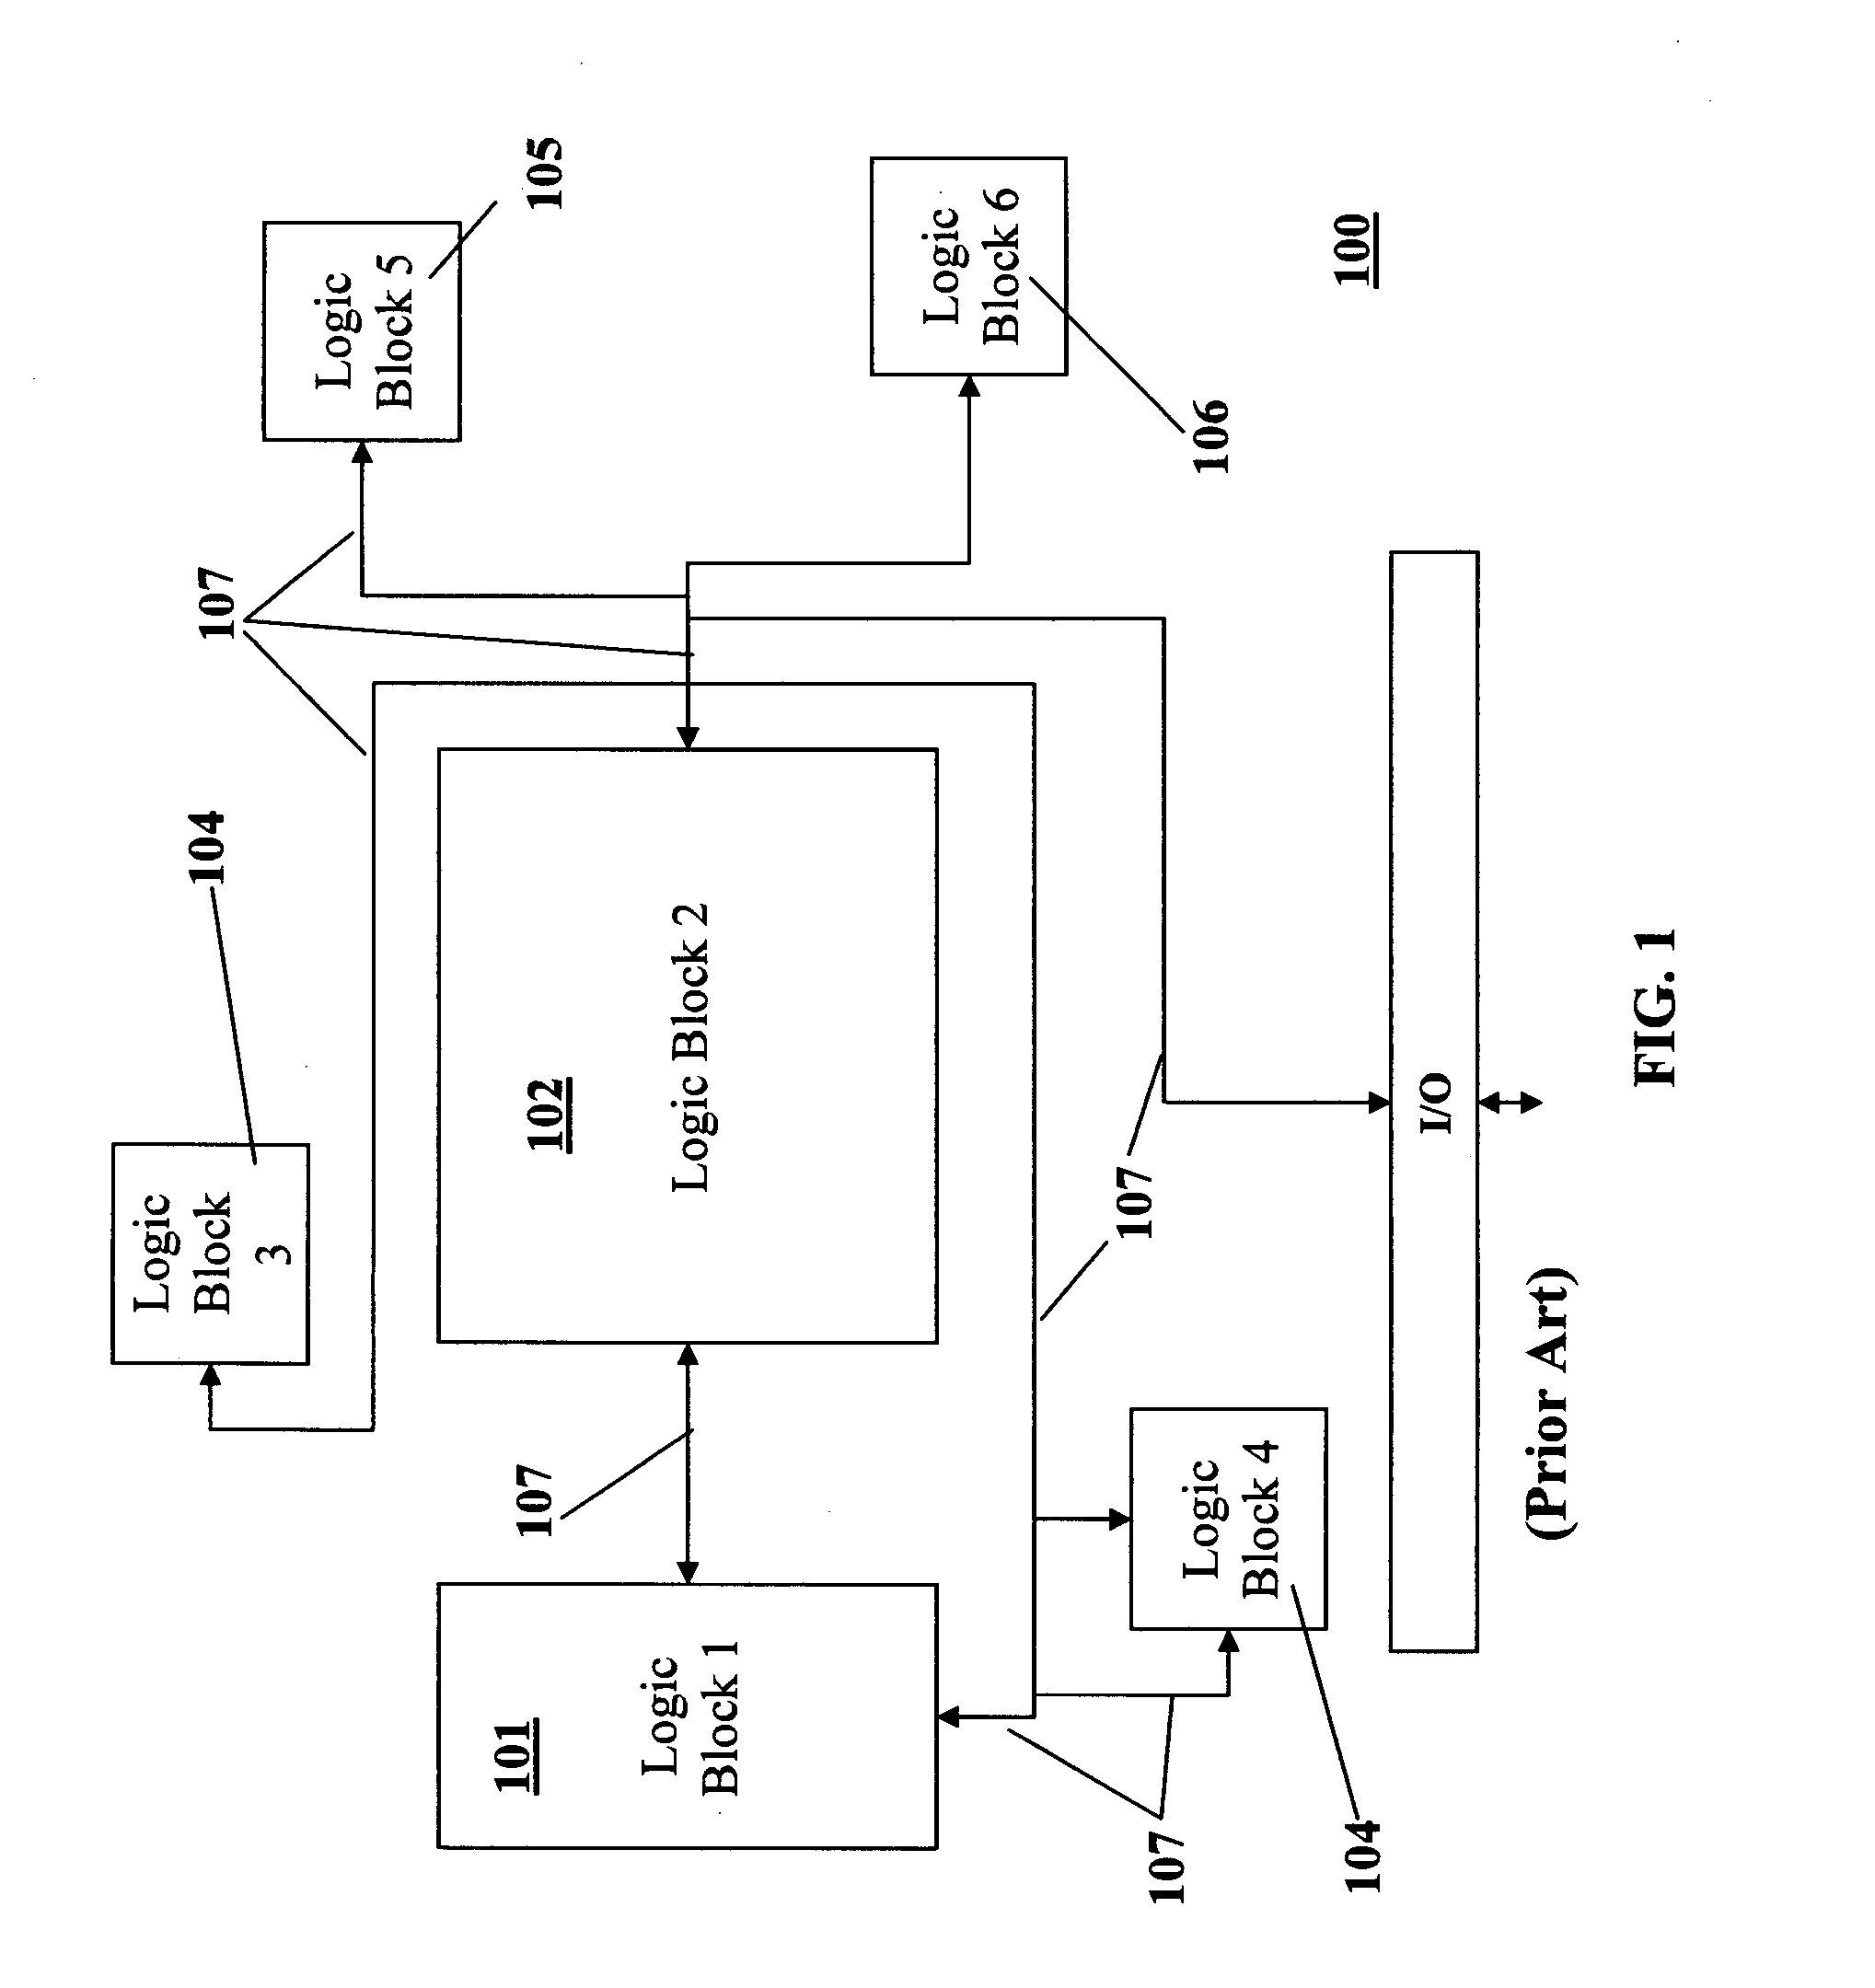 Architecture and method for providing integrated circuits